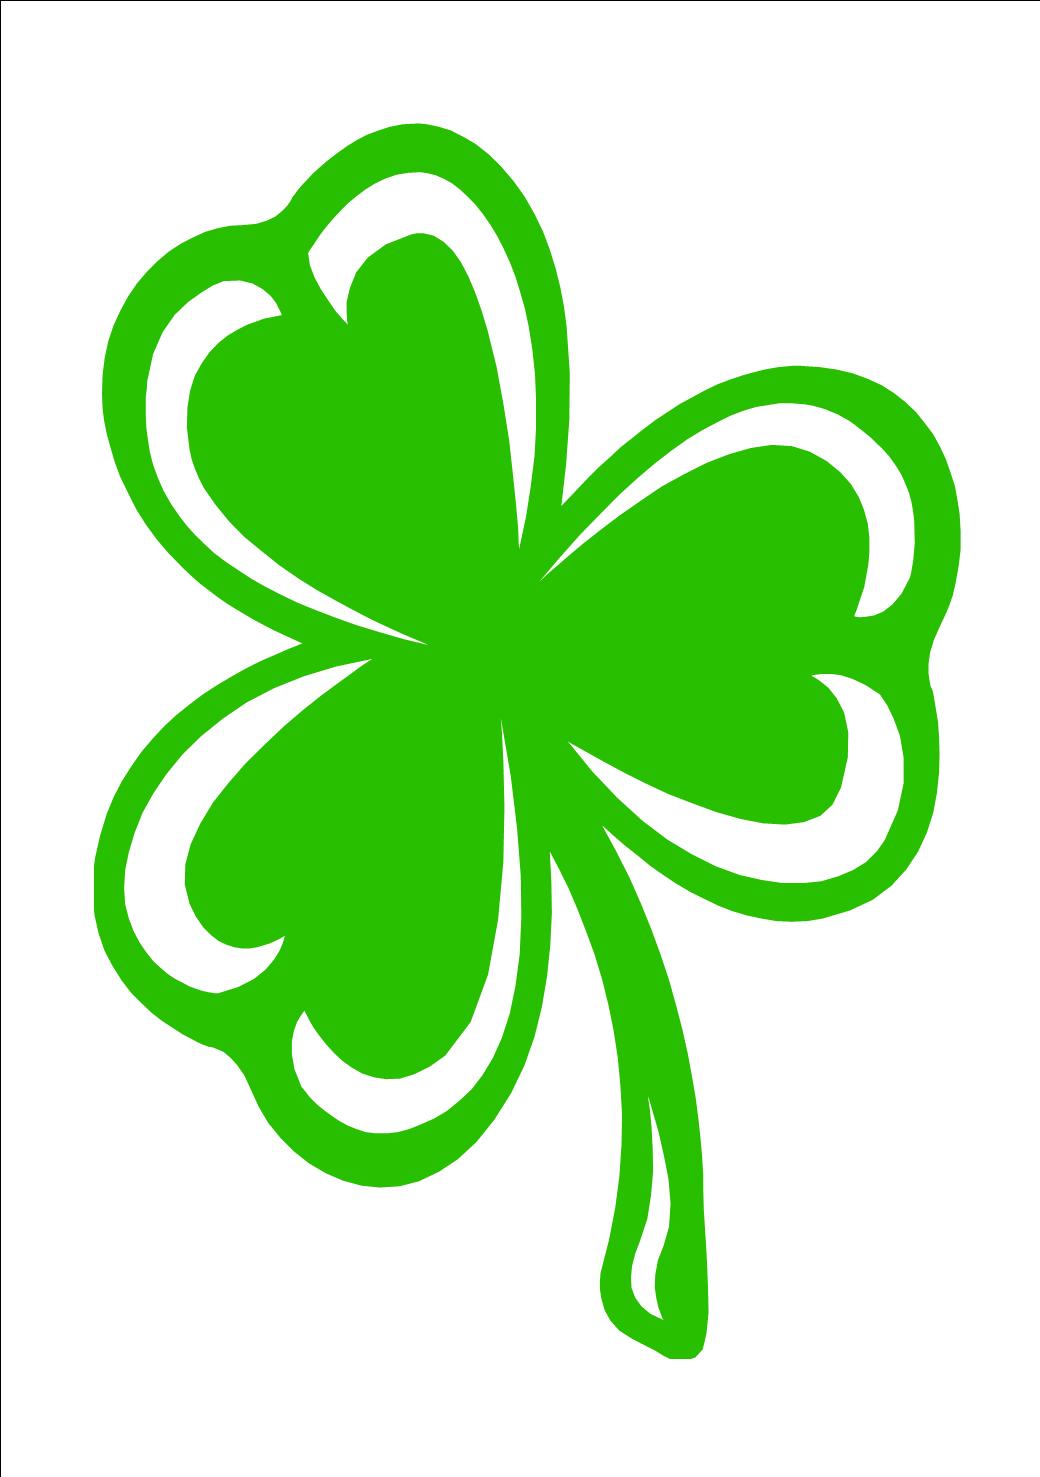 St. Patrick's Day! | Harris County Public Library